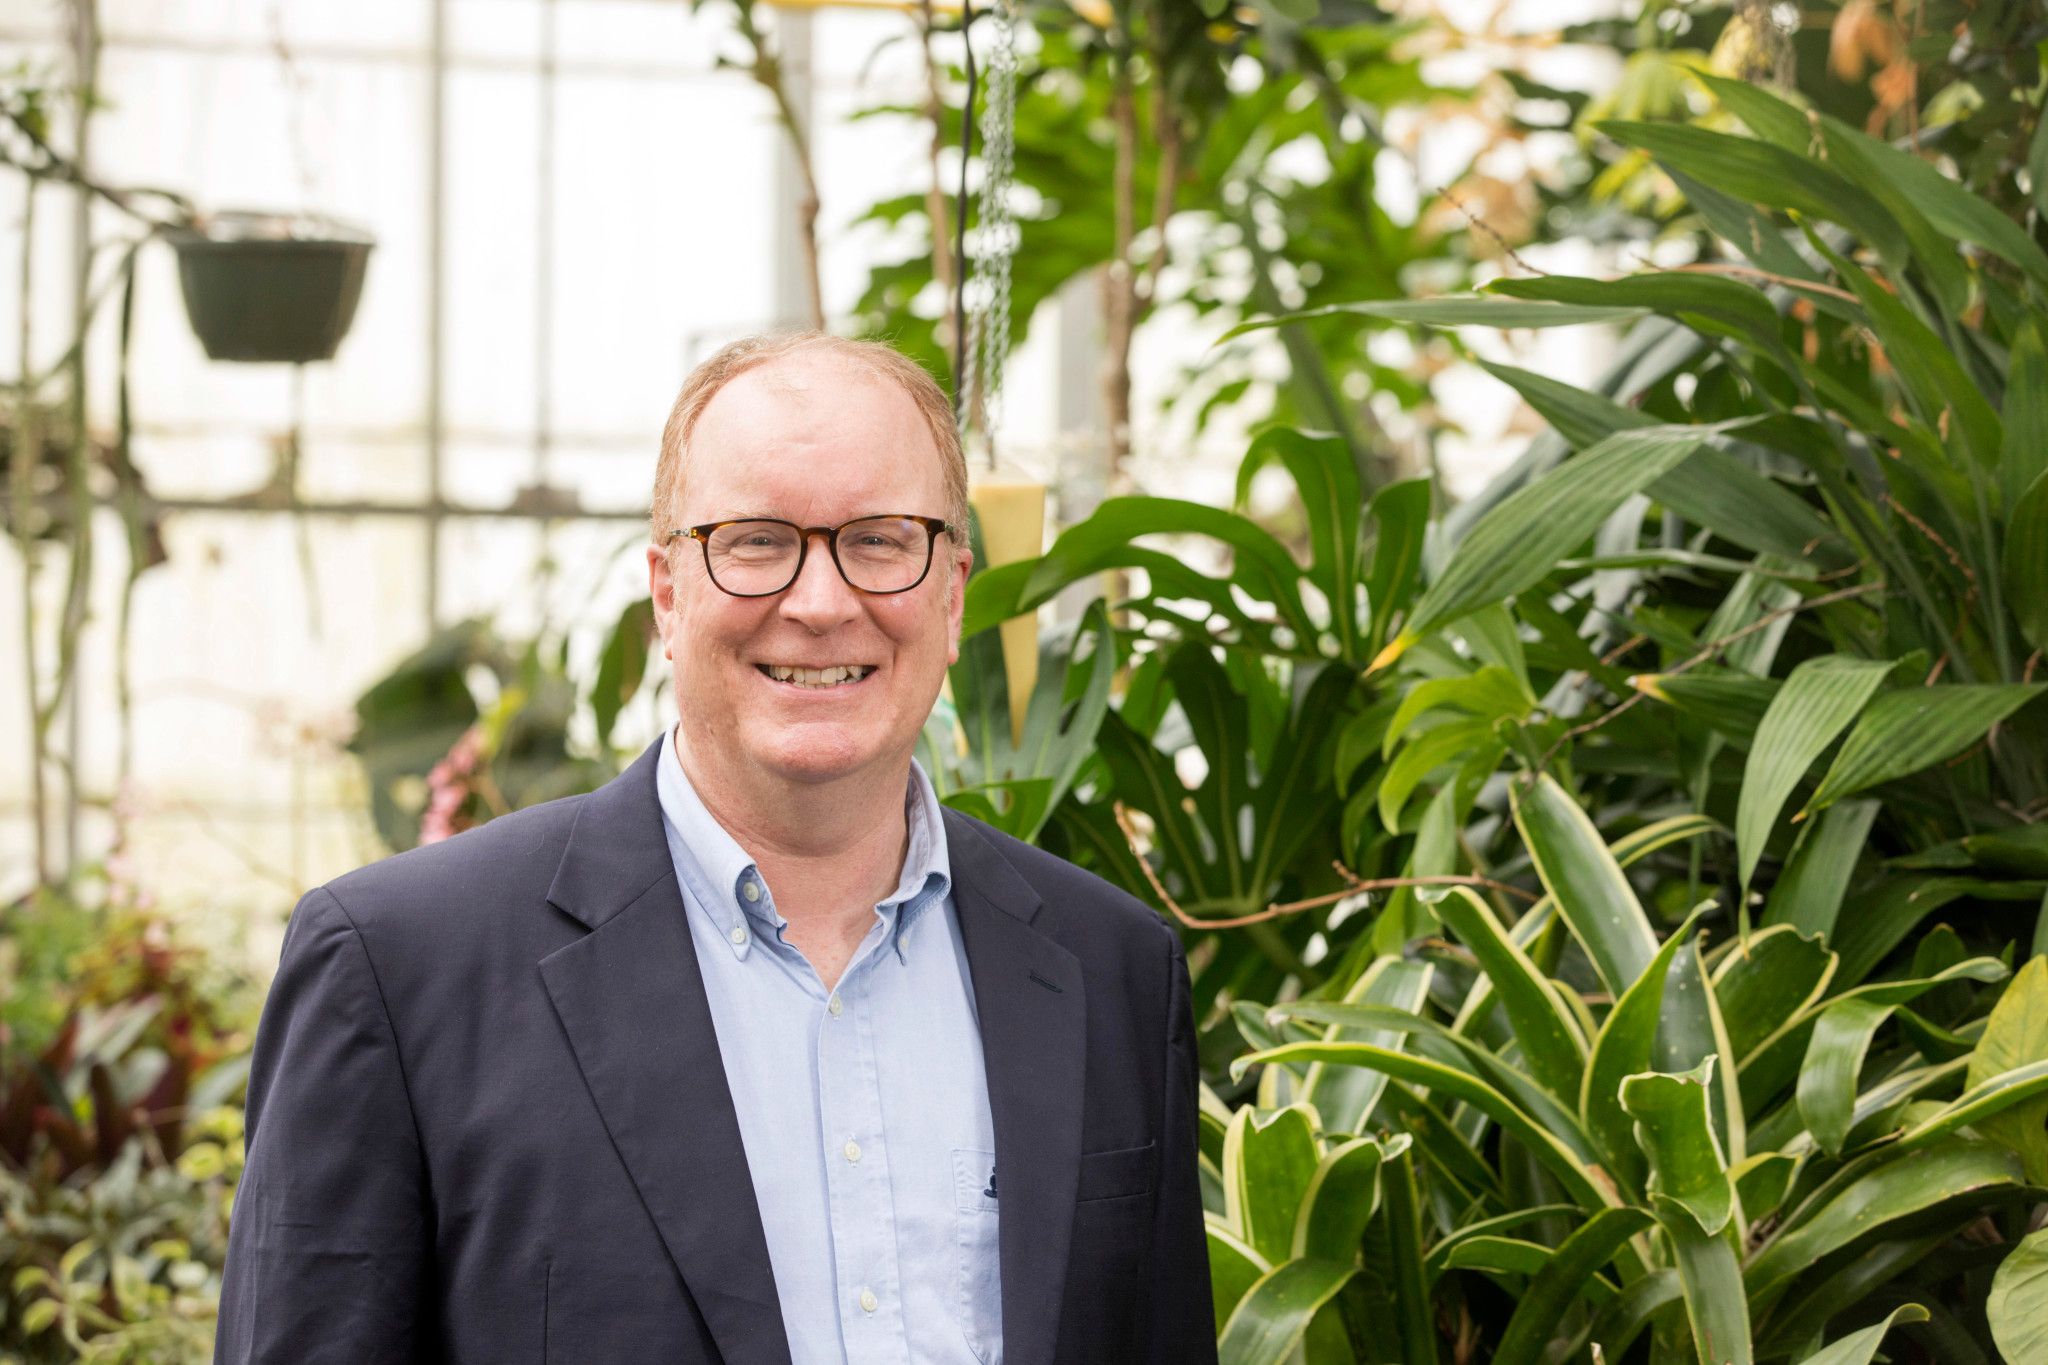 Man with glasses smiling in front of fern plants